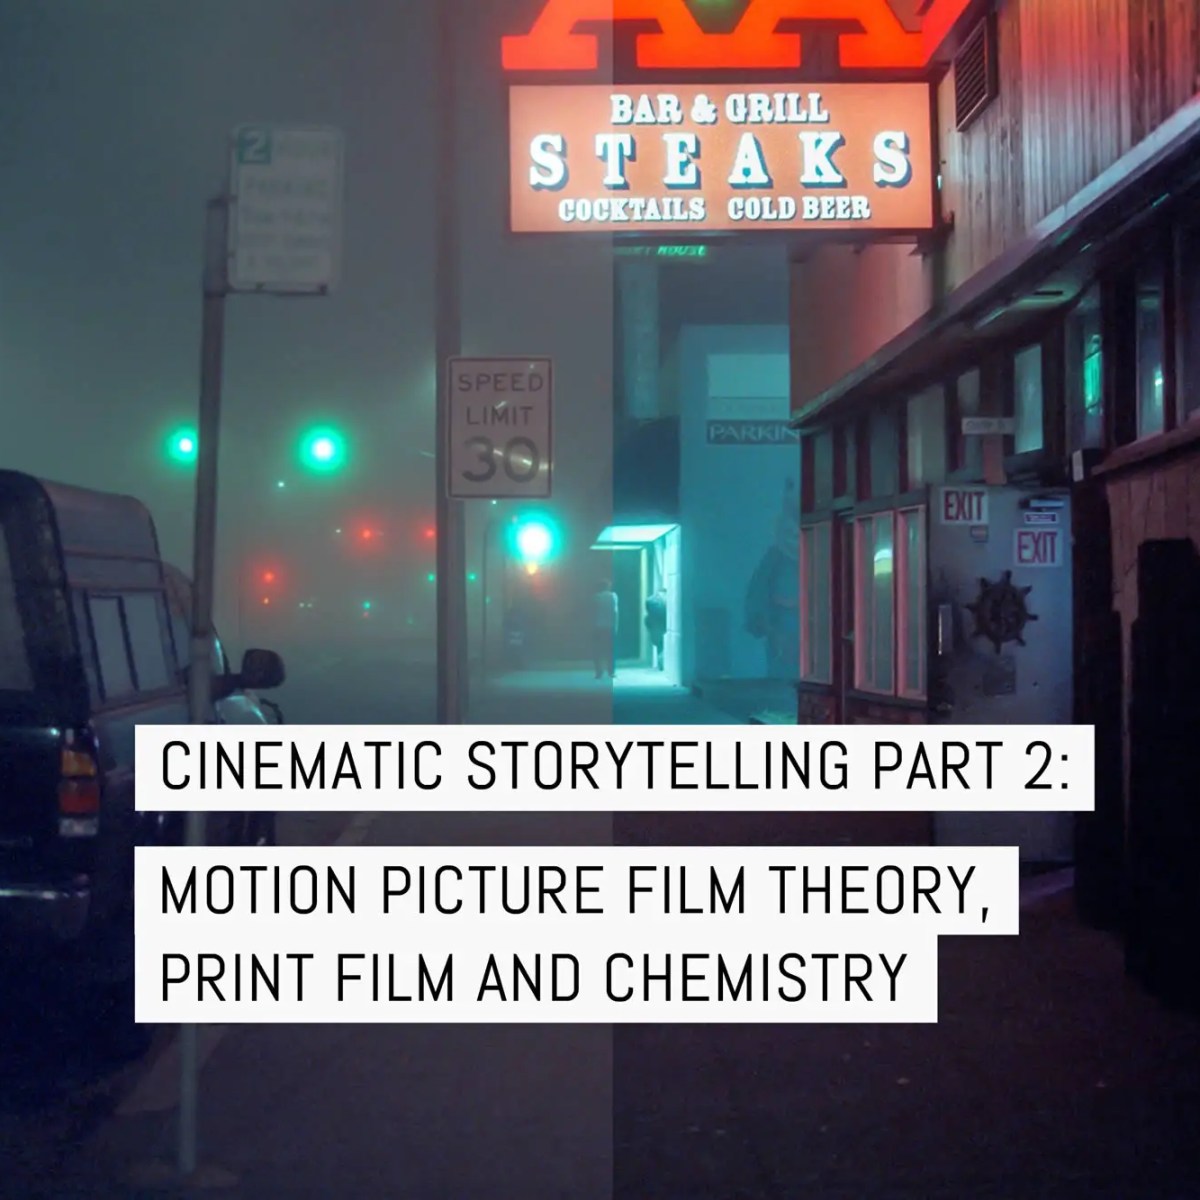 Cover - Cinematic storytelling part 2 - motion picture film, print film and chemistry v3